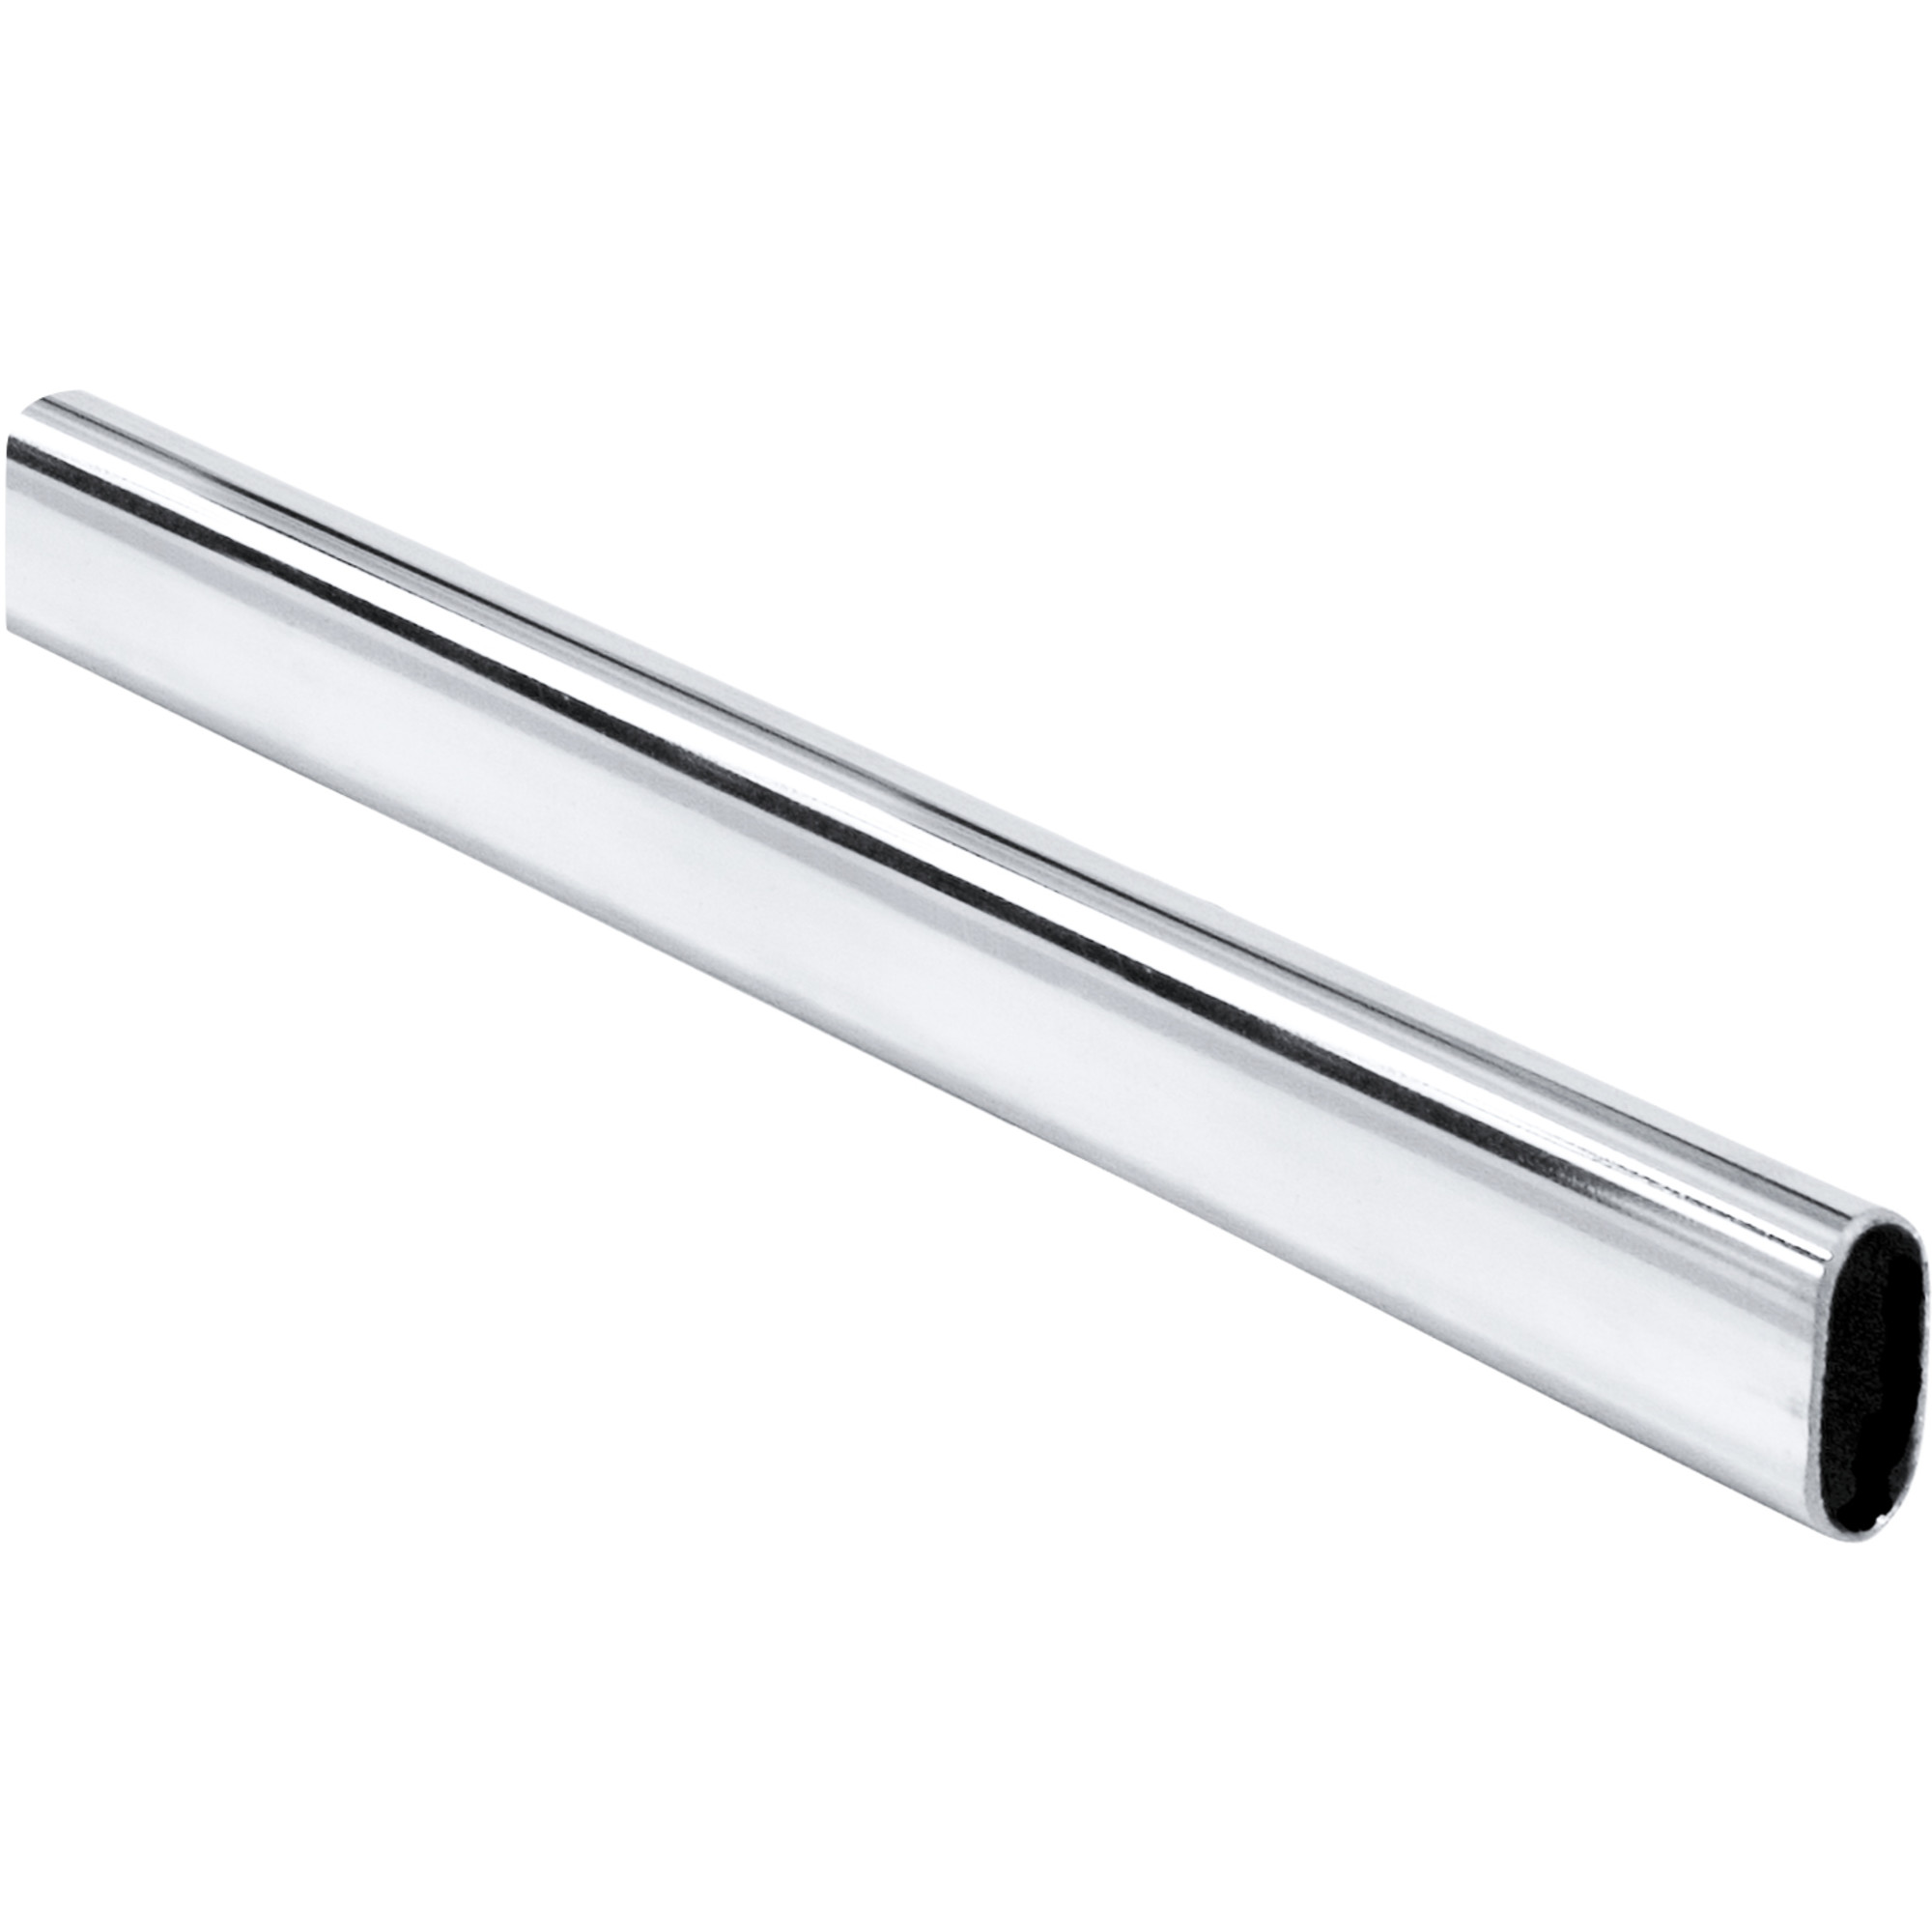 Hardware Resources 8' Oval 1.0 mm Closet Rod